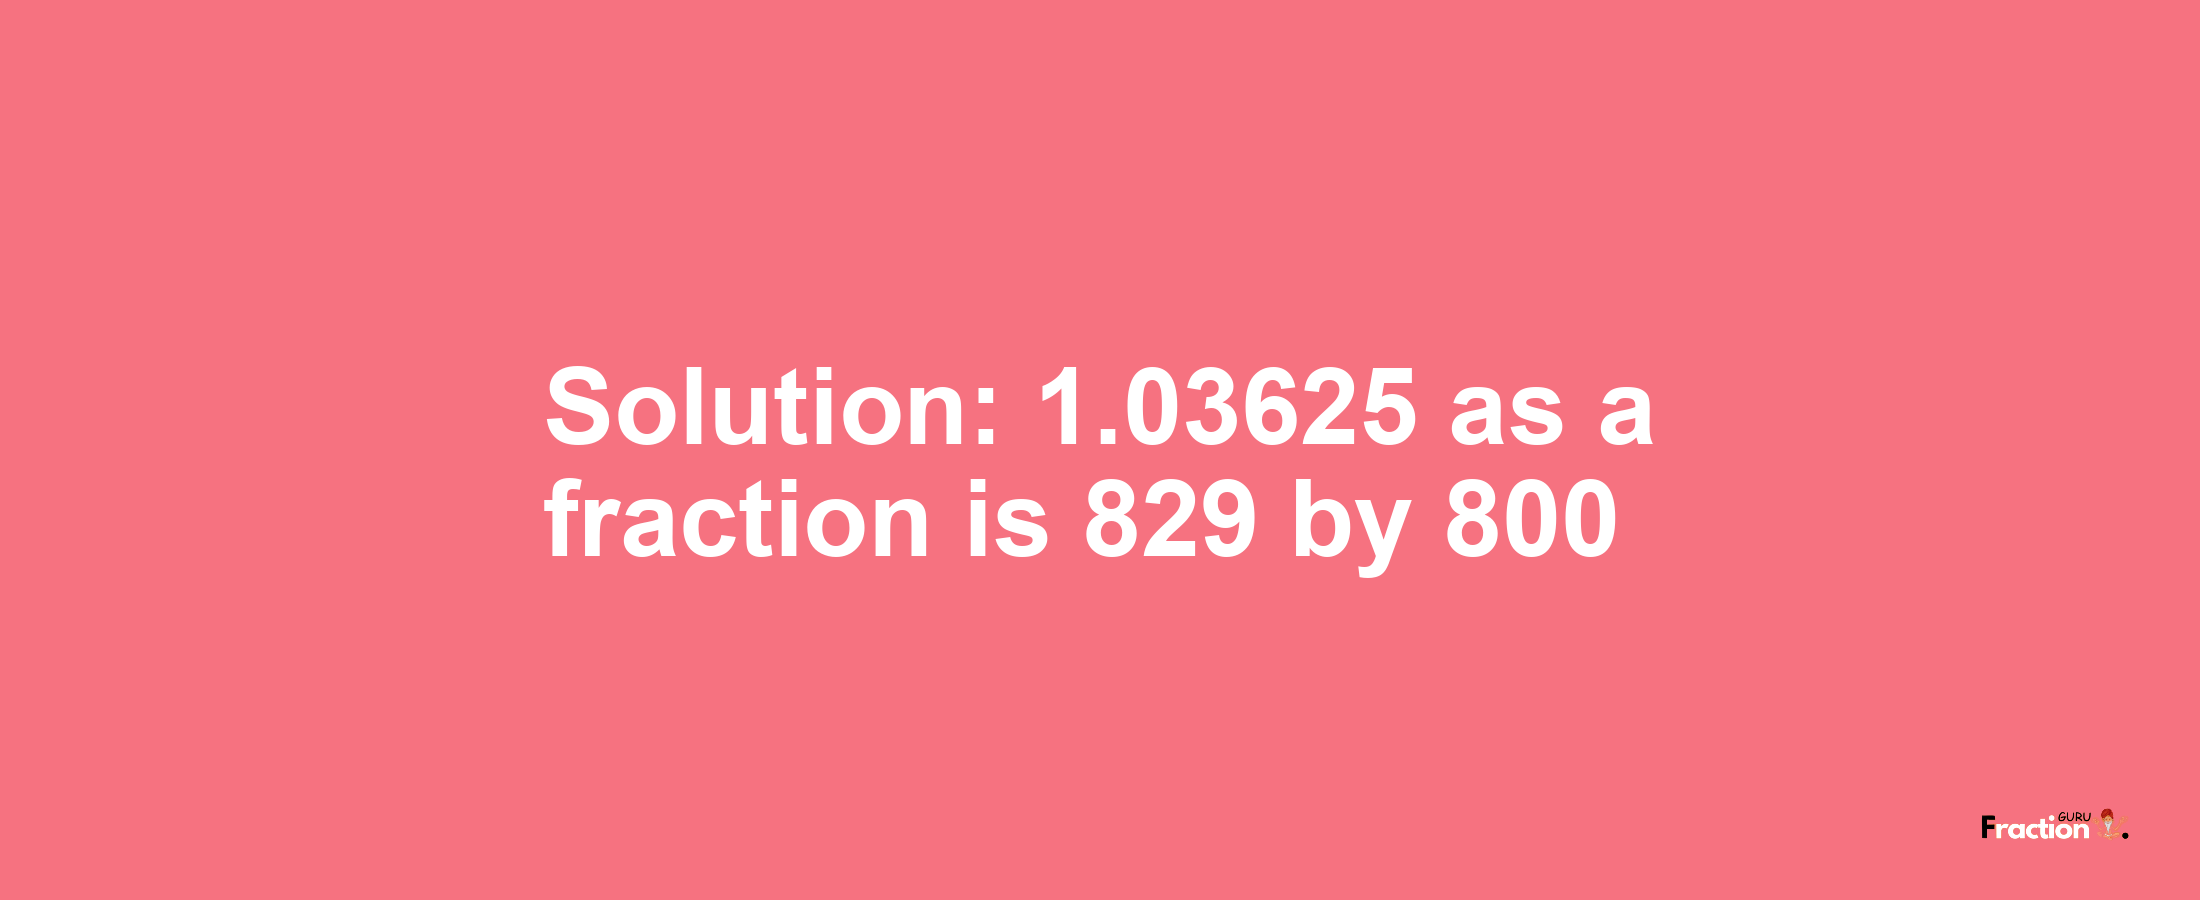 Solution:1.03625 as a fraction is 829/800